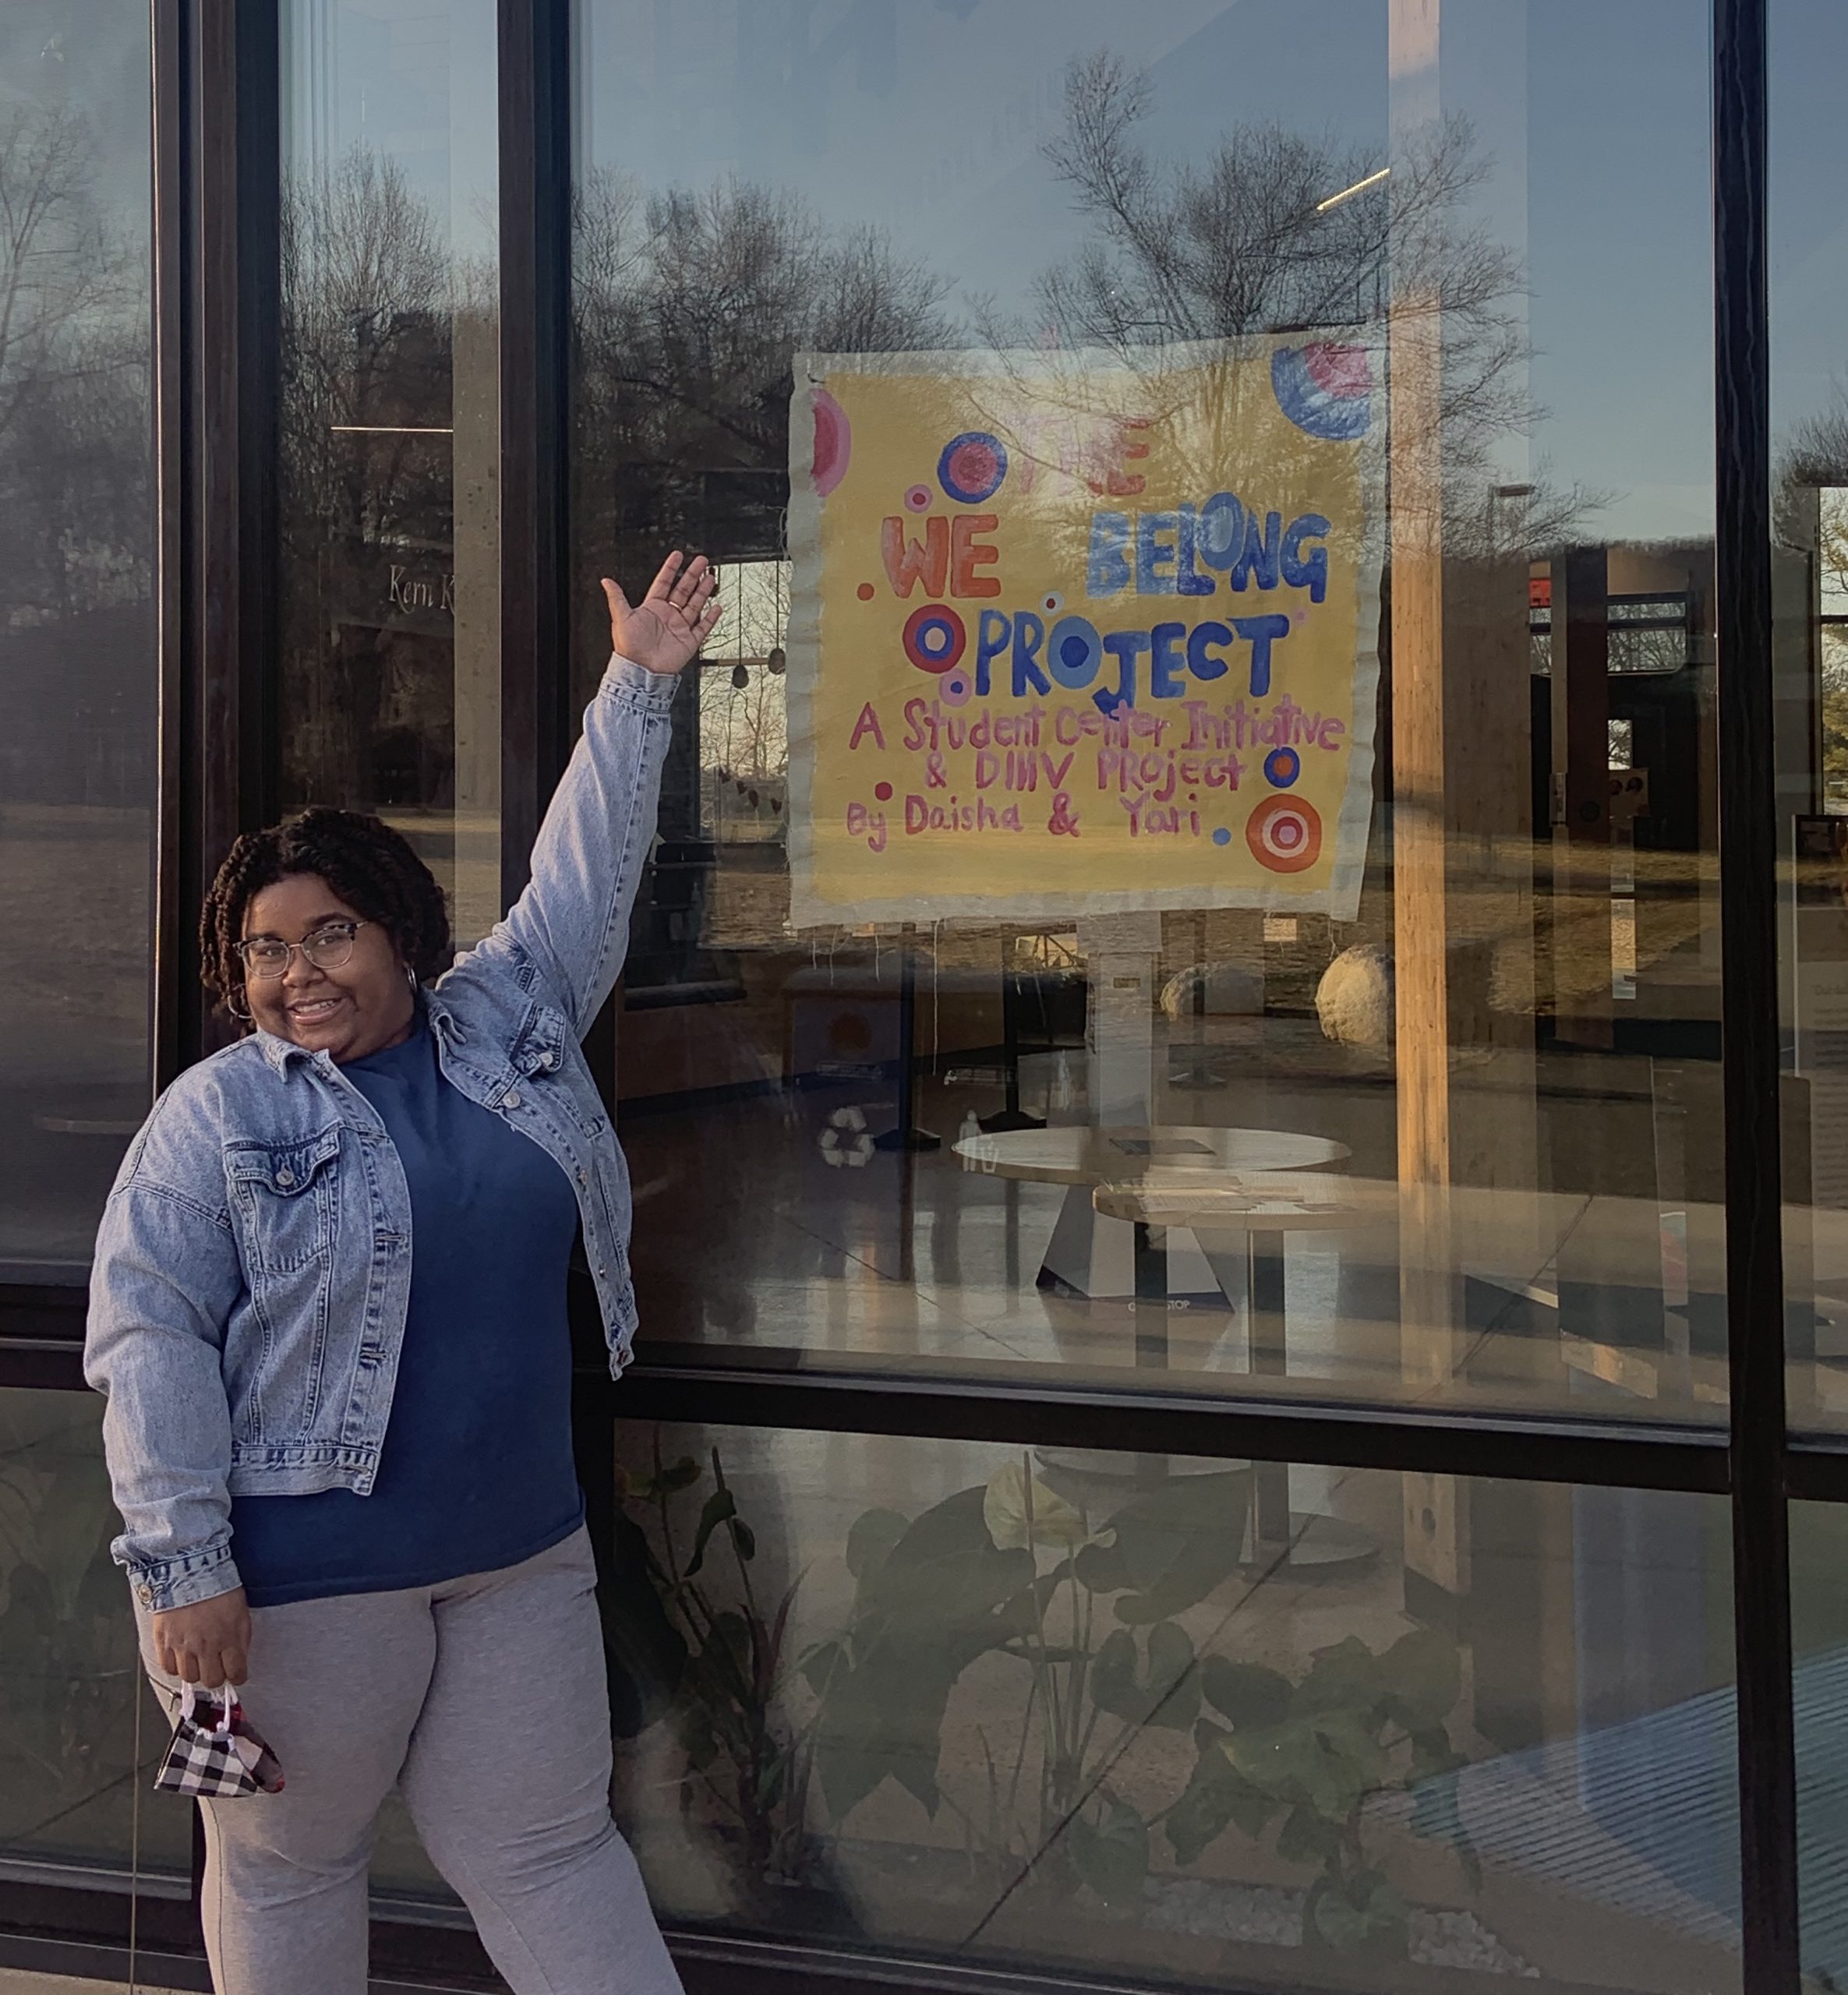 Daisha stands in front of the R.W. Kern Center gesturing toward a We Belong Project banner.